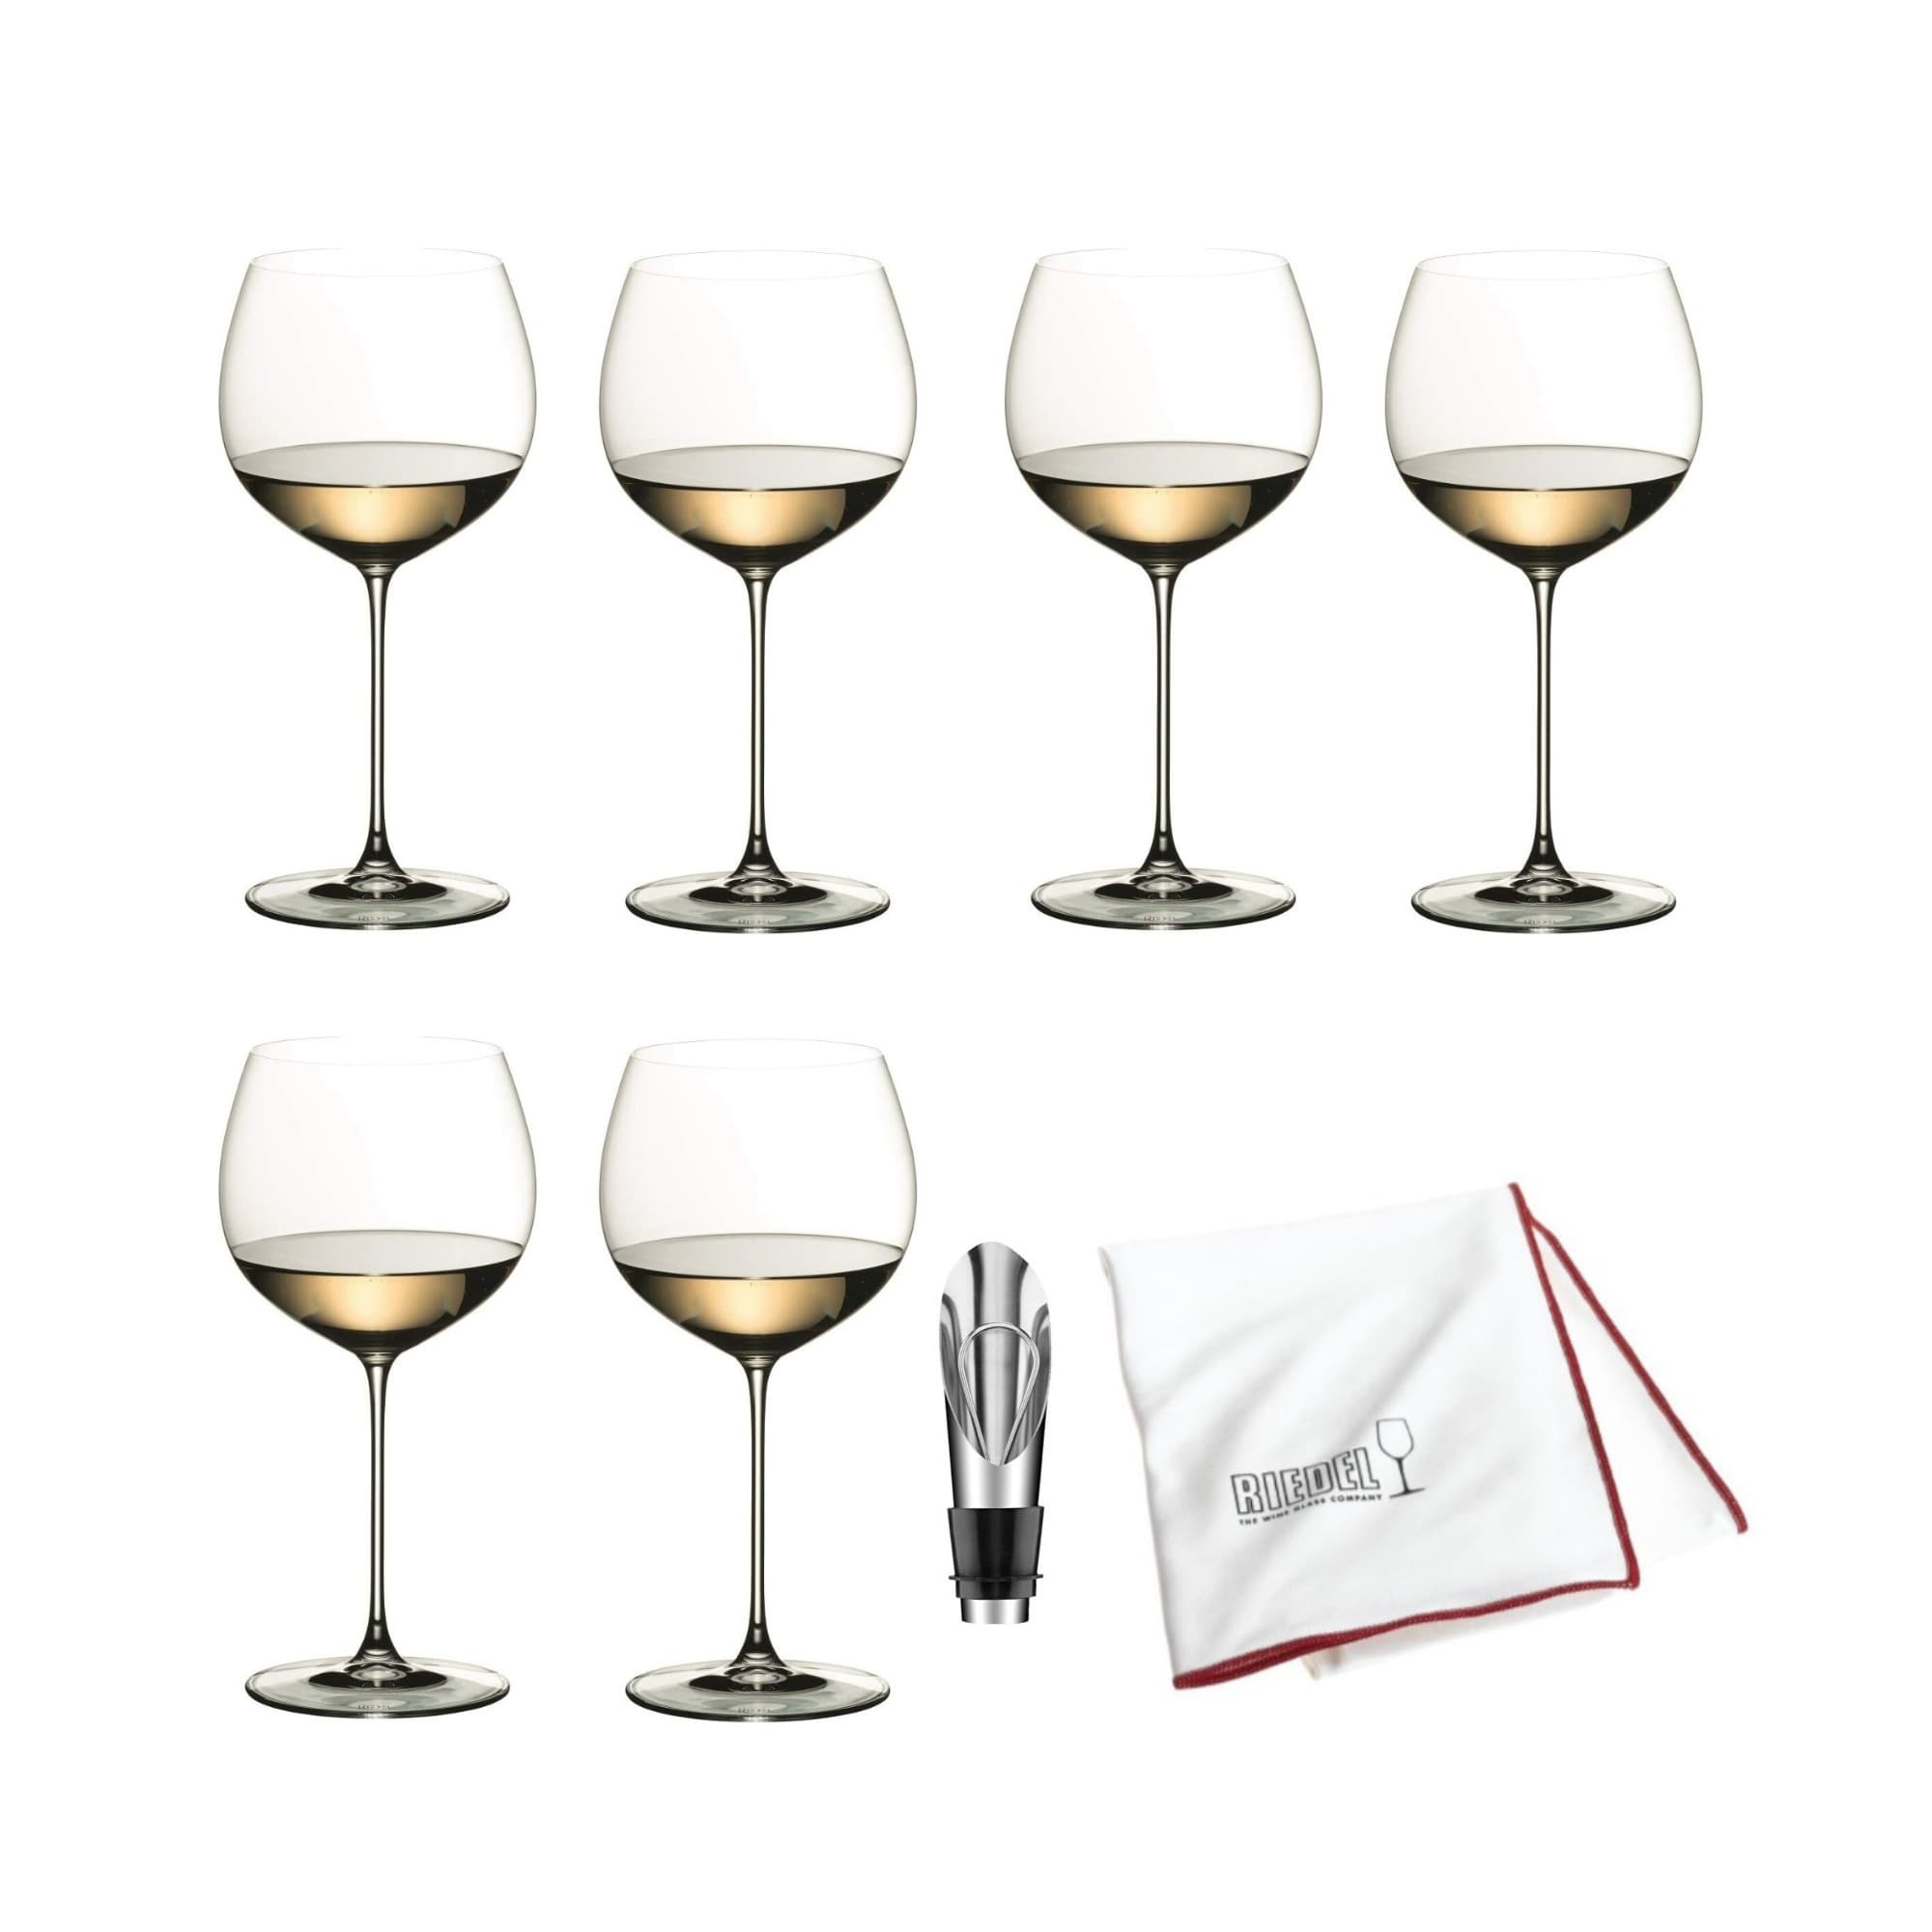 https://ak1.ostkcdn.com/images/products/is/images/direct/1b6942c9b4c352a8f1c34751245755af3879ba7a/Riedel-Veritas-Chardonnay-Glasses-%286-pack%29-with-Cloth-and-Wine-Pourer.jpg